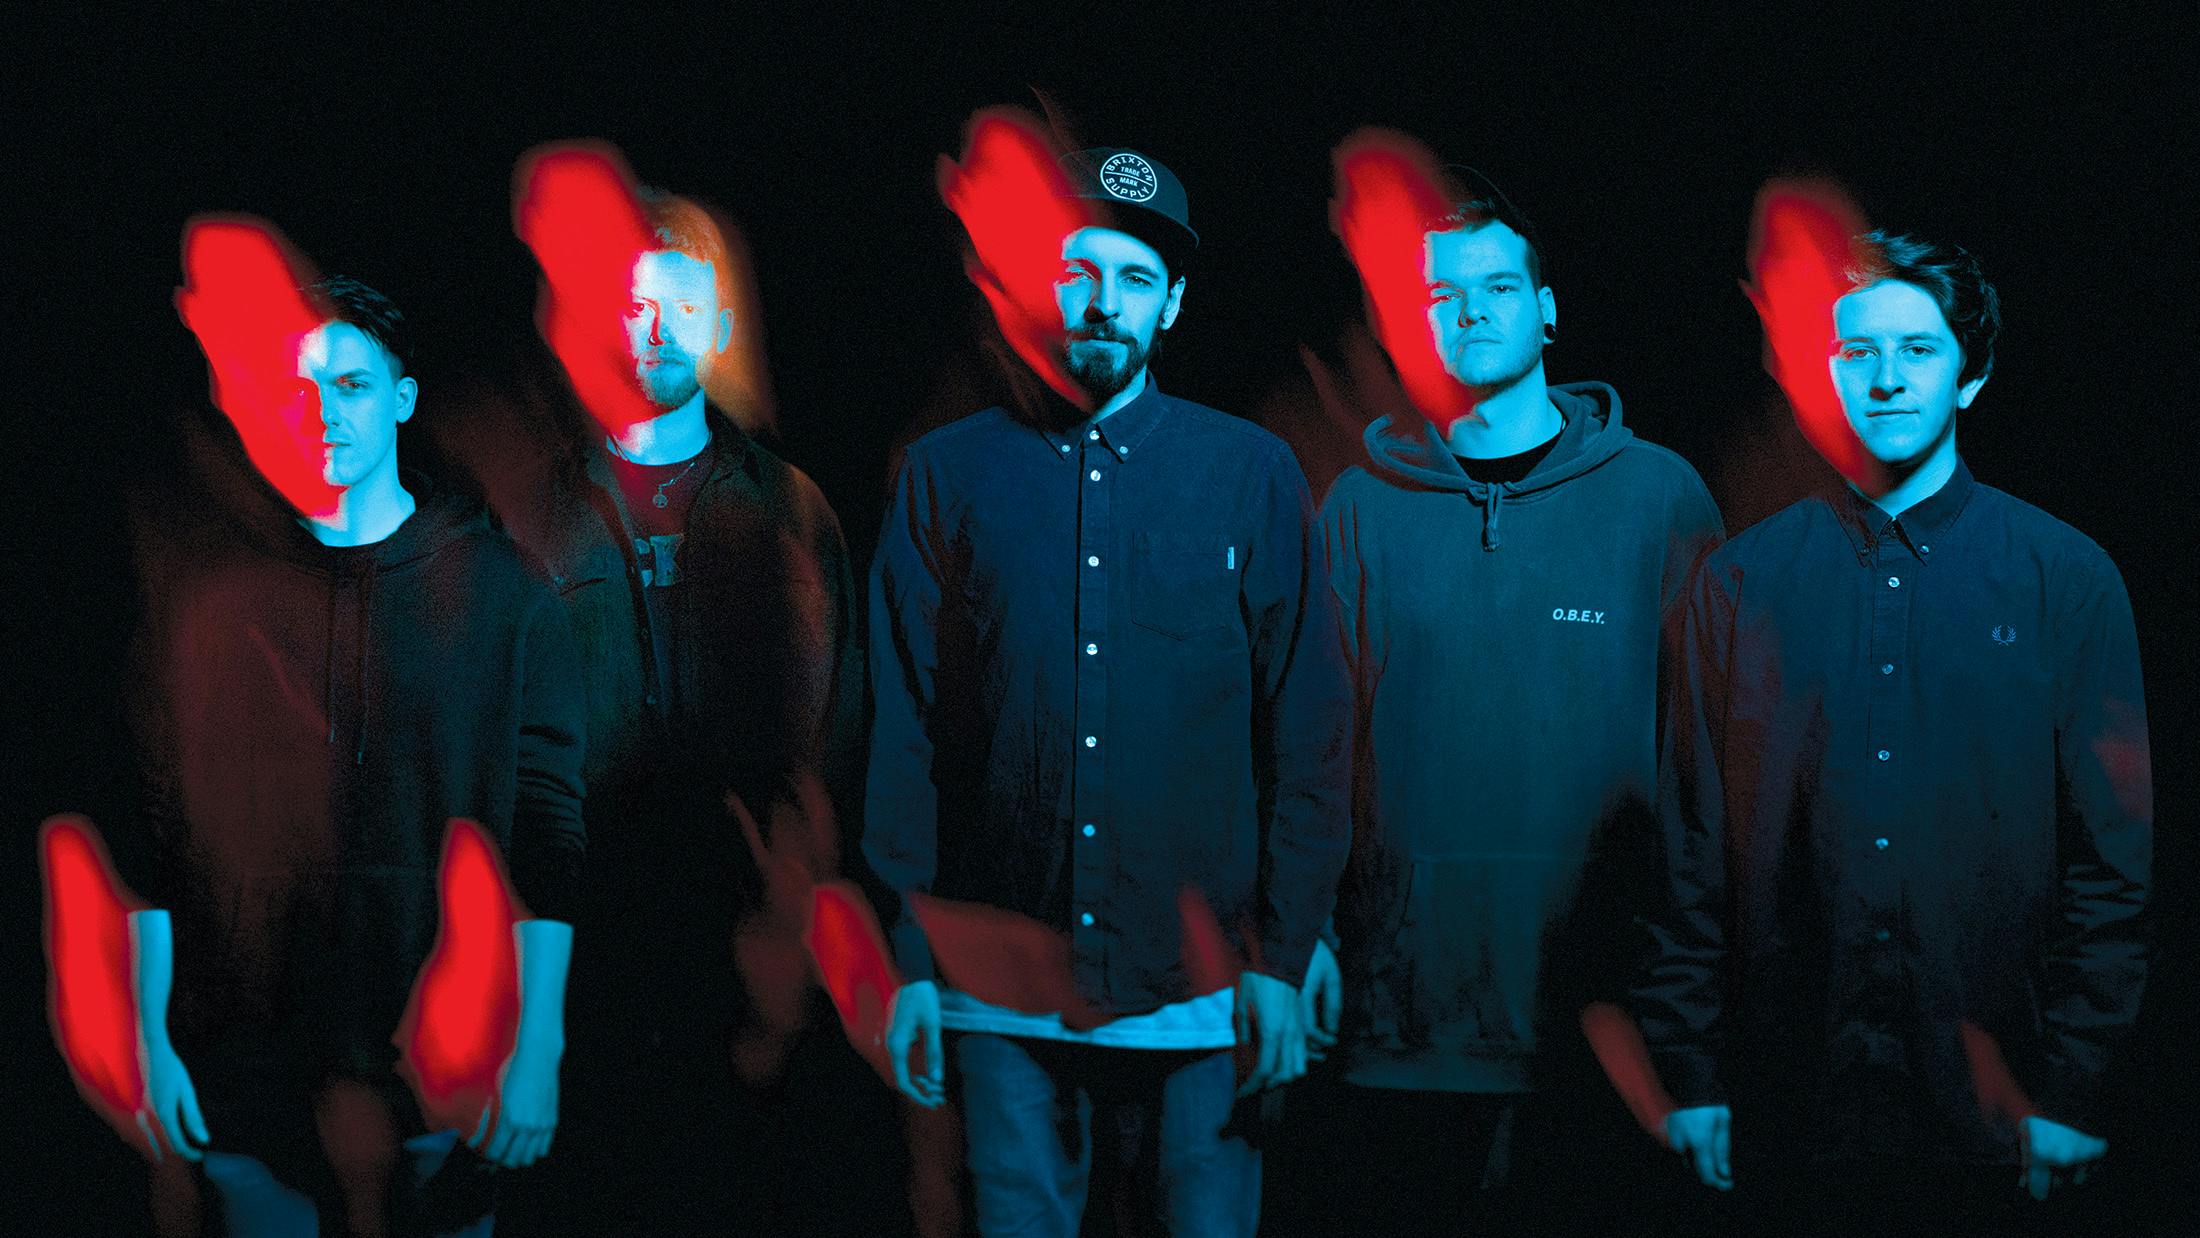 Exclusive: Watch The New Groundculture Video!